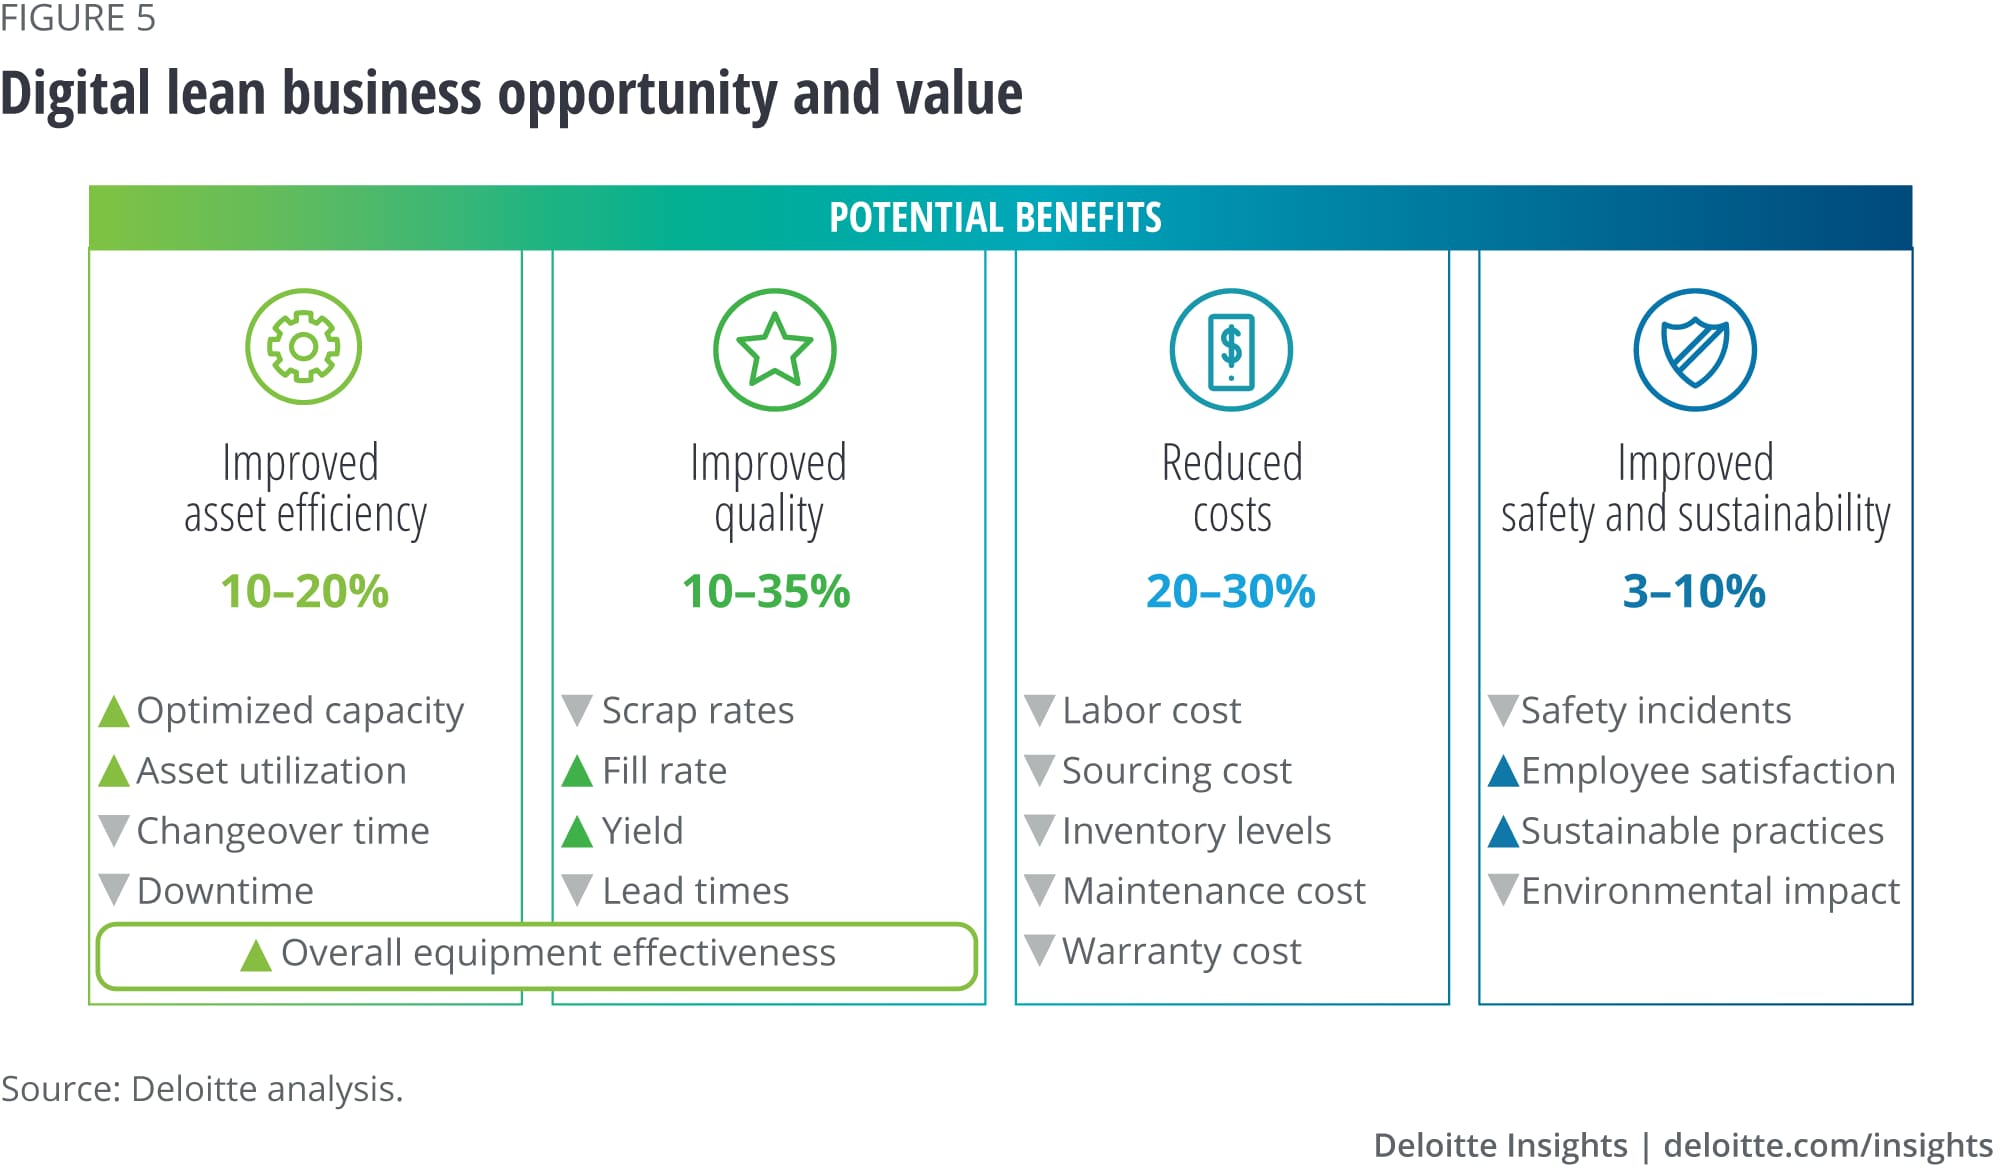 Digital lean business opportunity and value